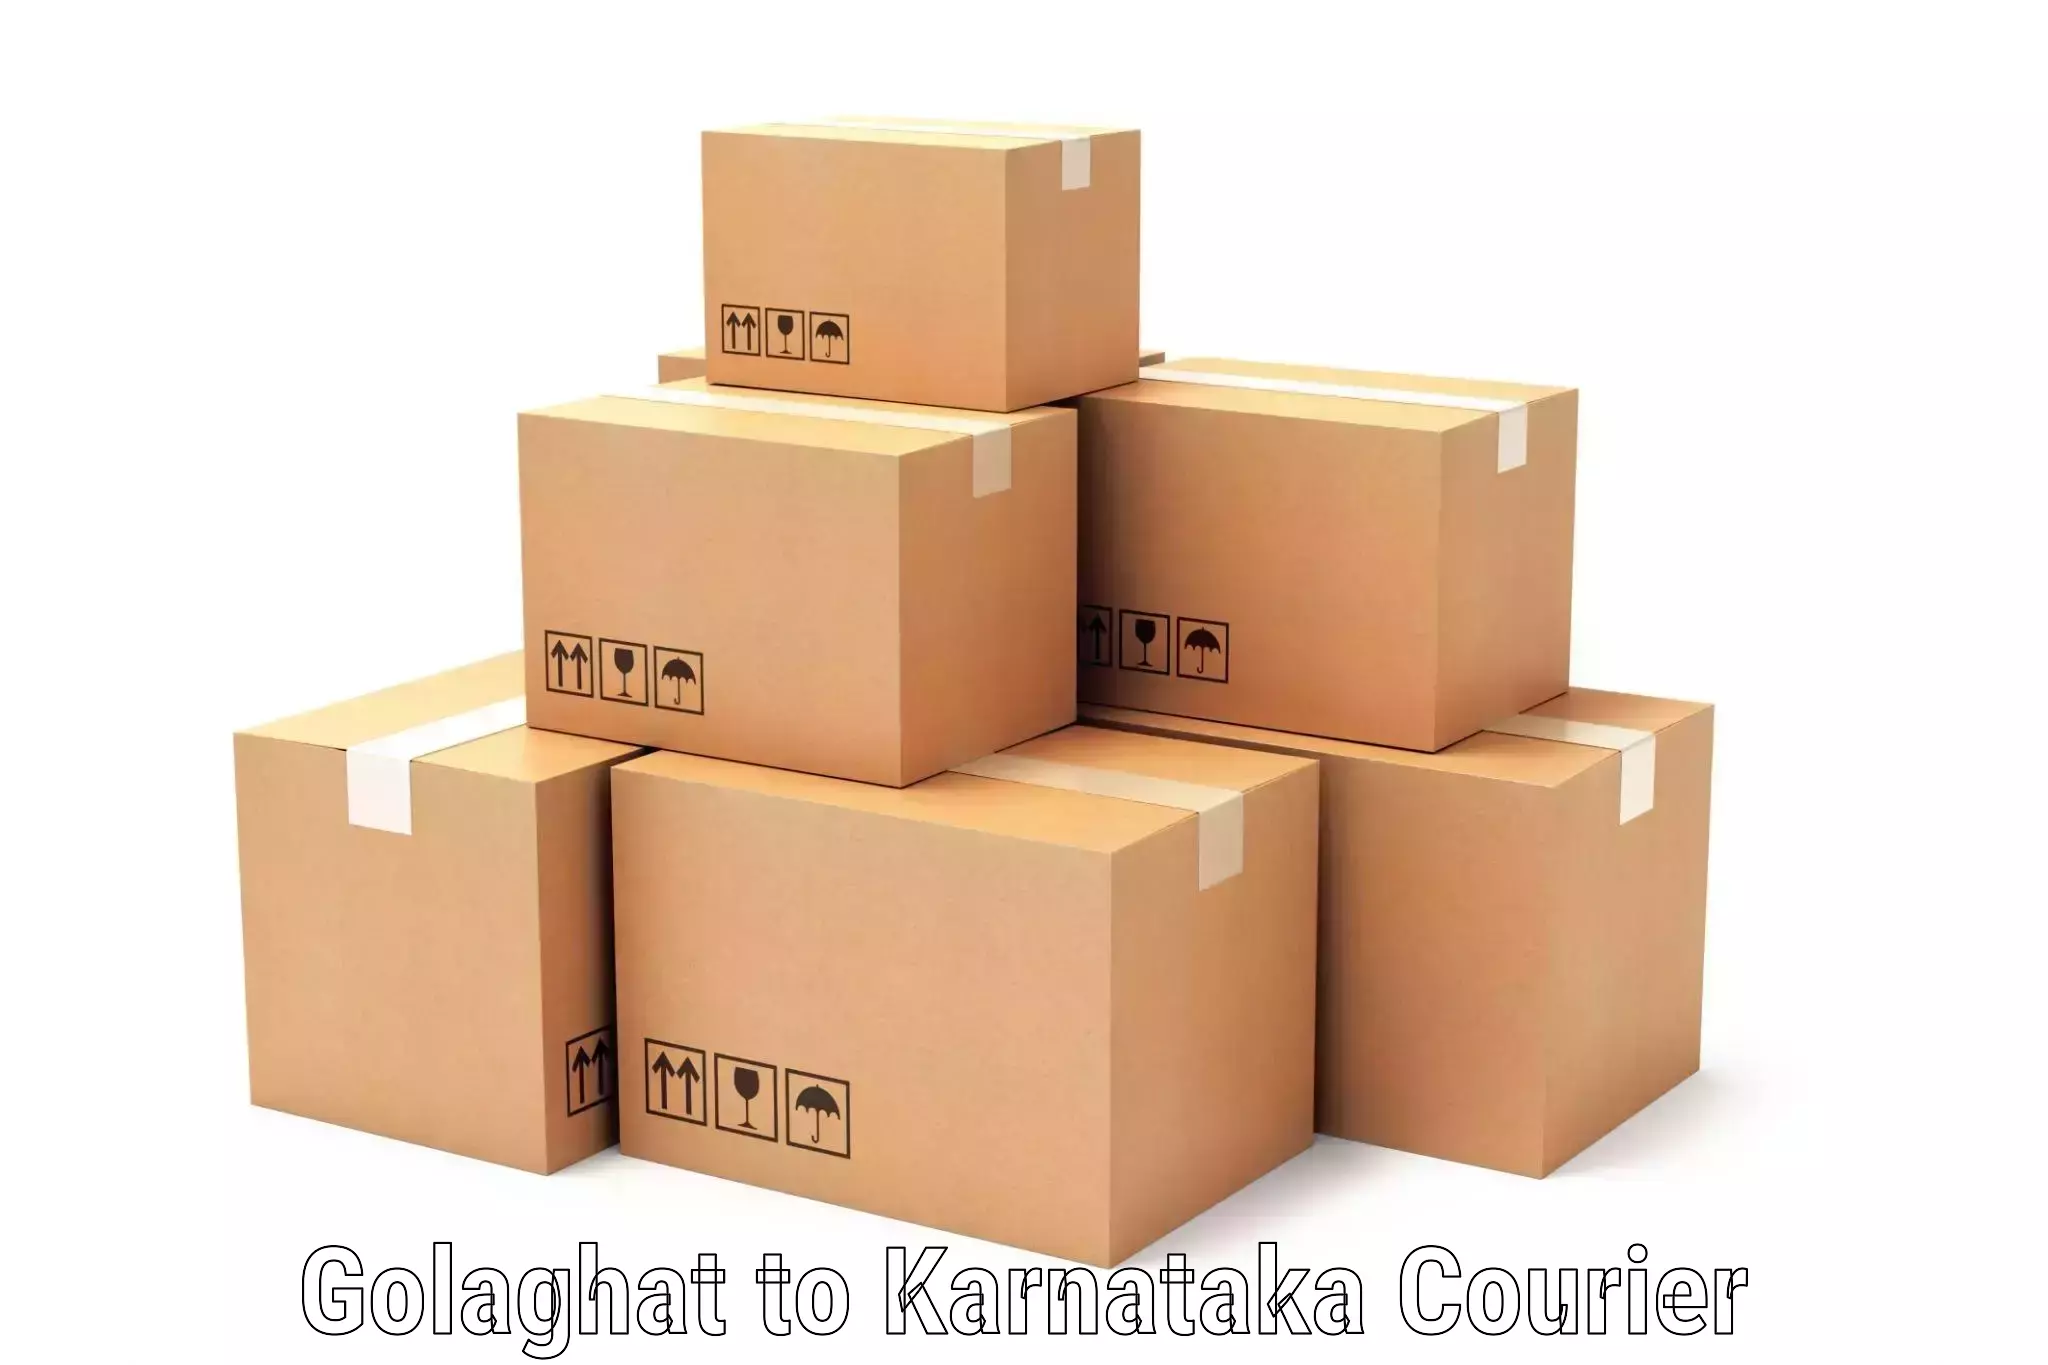 Fast shipping solutions Golaghat to Yenepoya Mangalore